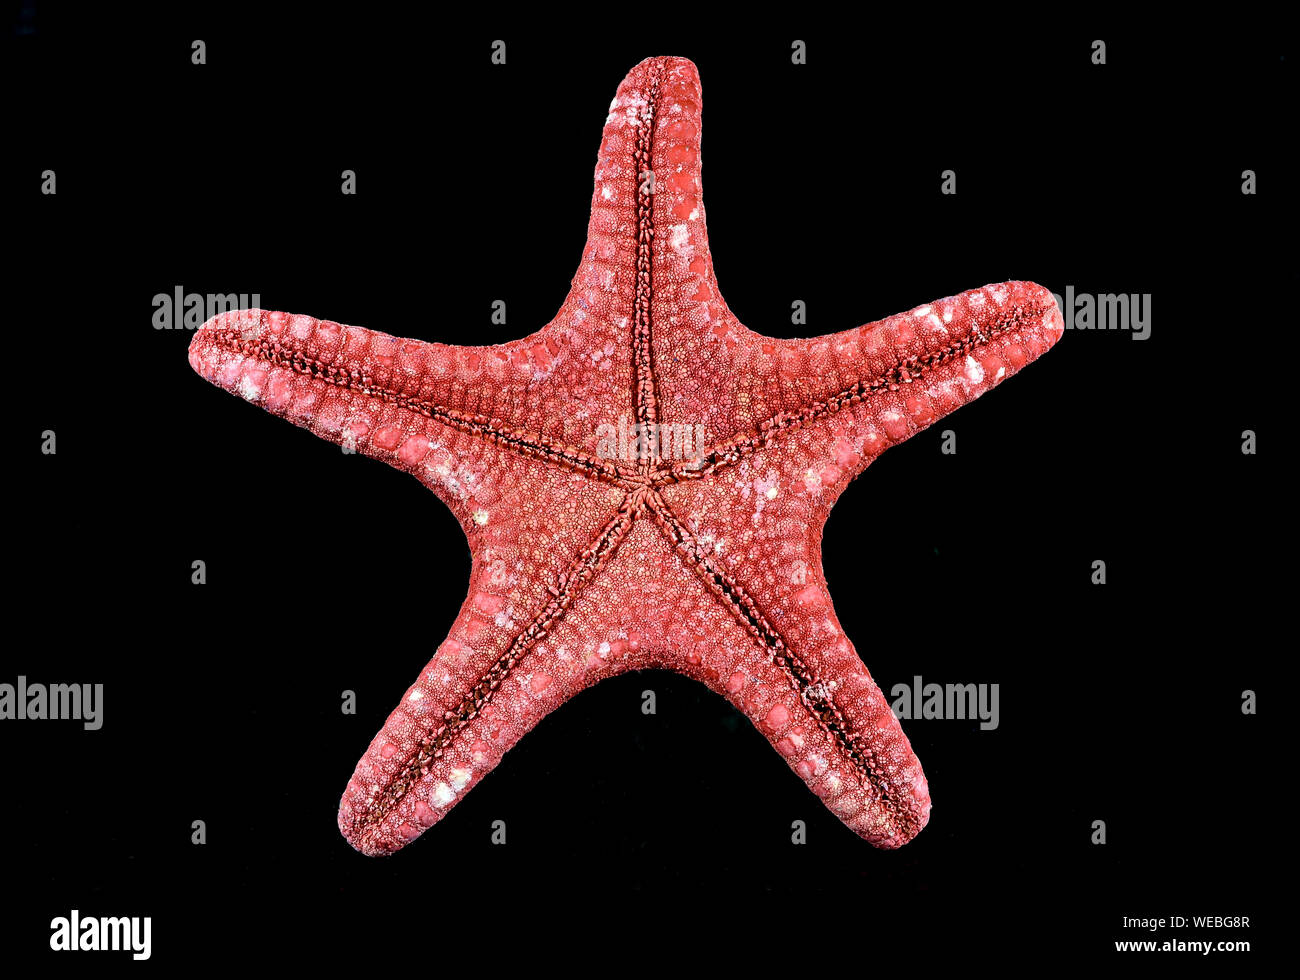 Close-up of the ventral part of a red sea star , marine species , isolated on black background, showing details of the tissue Stock Photo